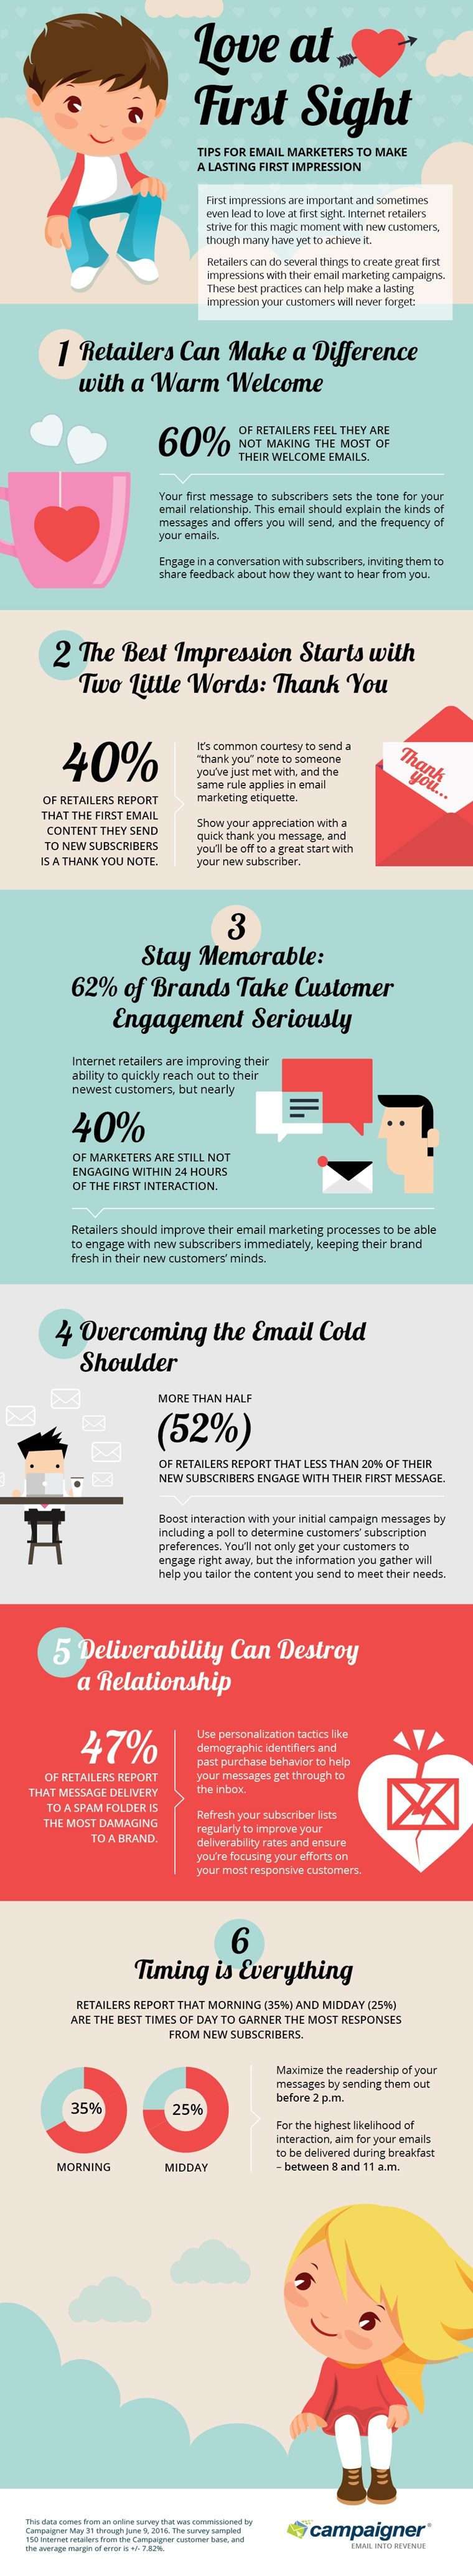 Email Marketing Tips for Lasting Impressions | SEJ